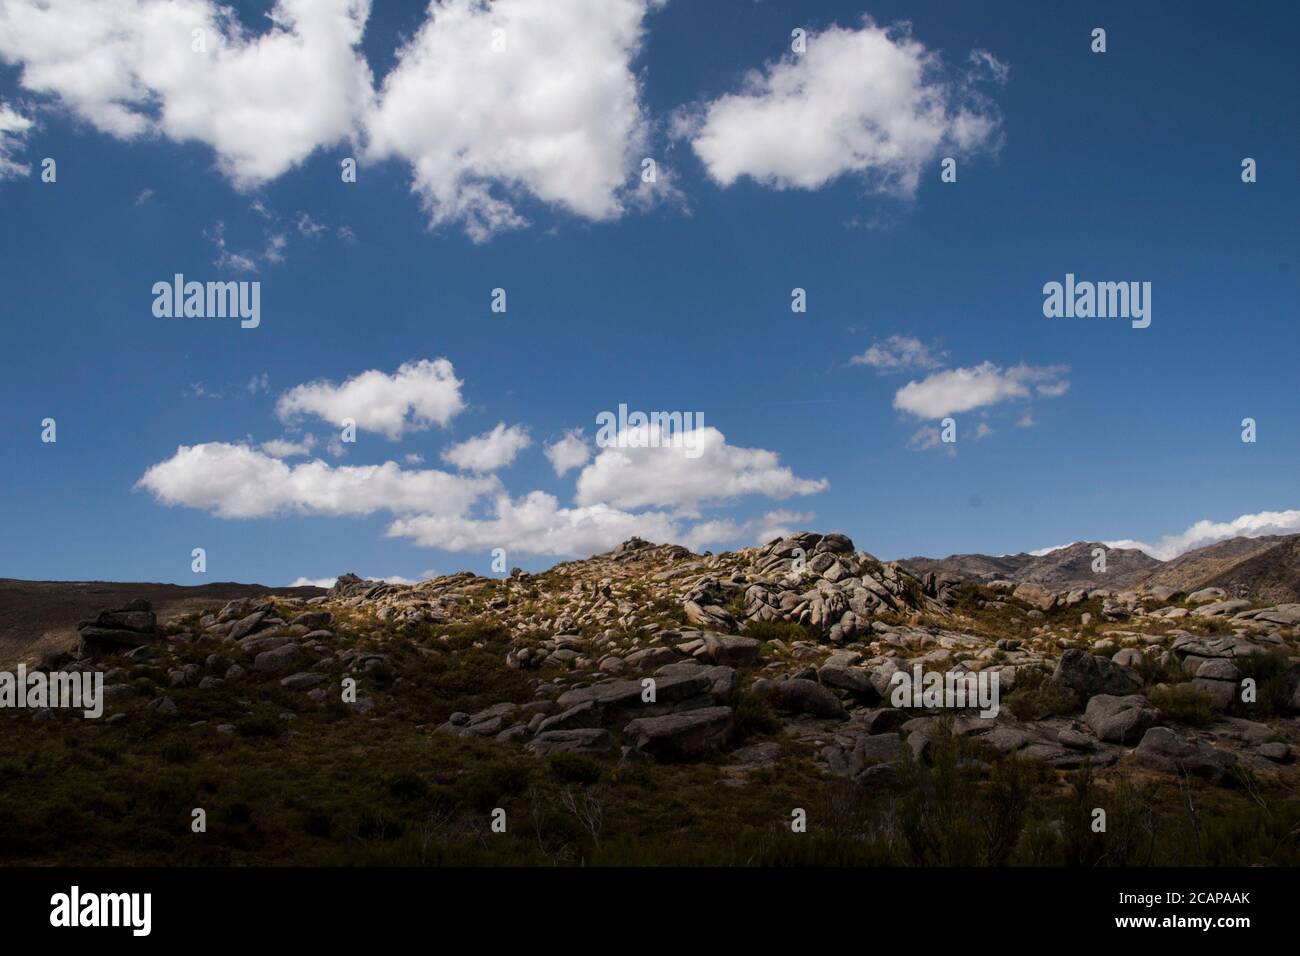 Contrast between light and shadow on rocky mountain terrain under cloudy blue sky Stock Photo